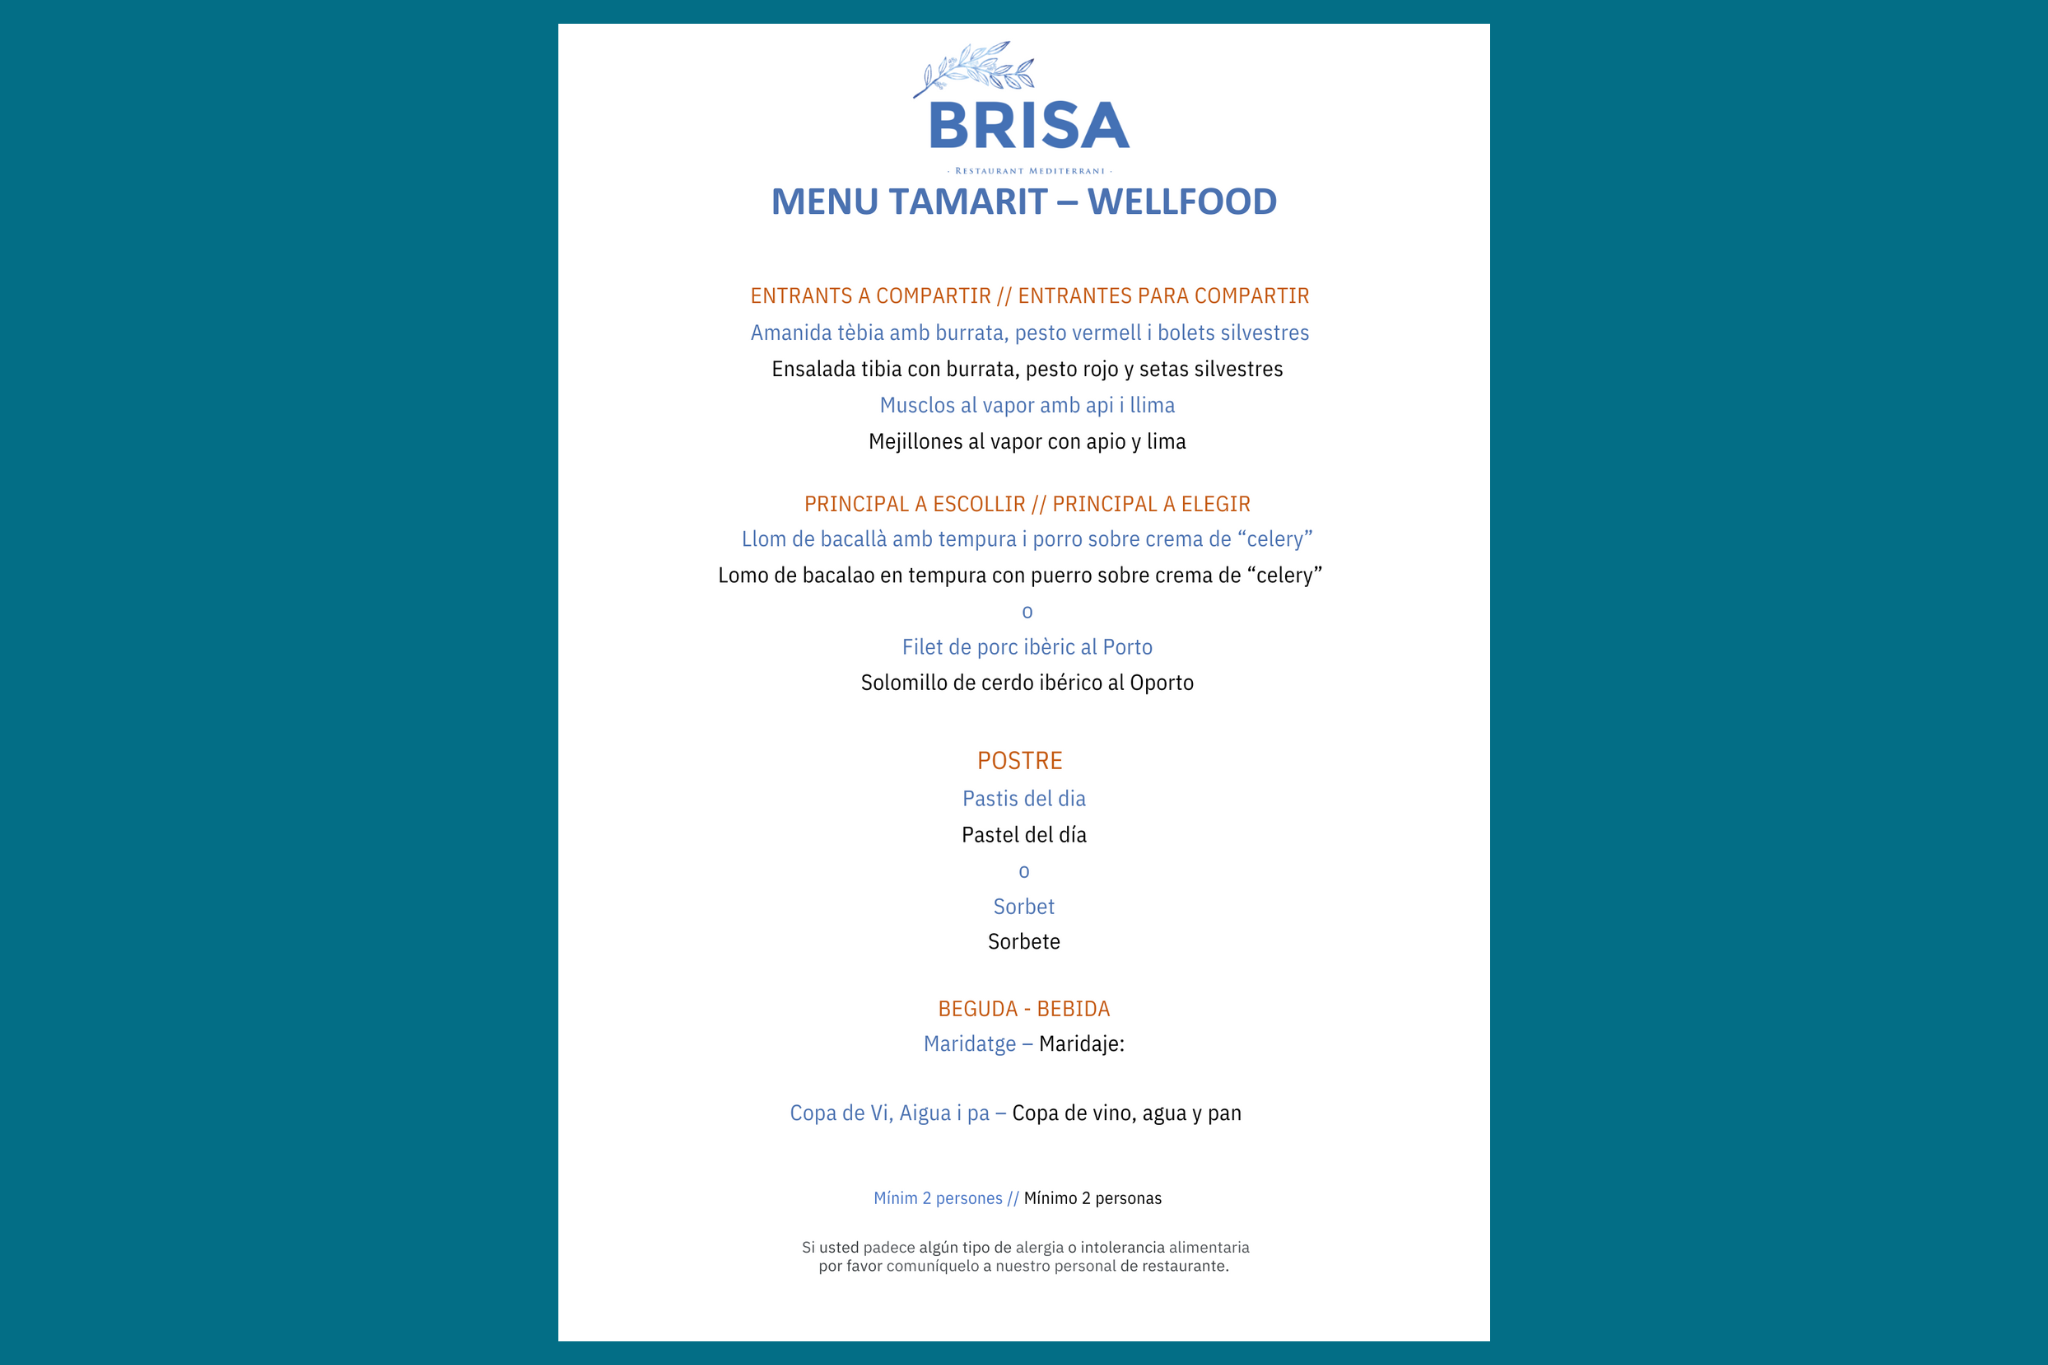 Gift package with Spa and lunch or dinner at Brisa